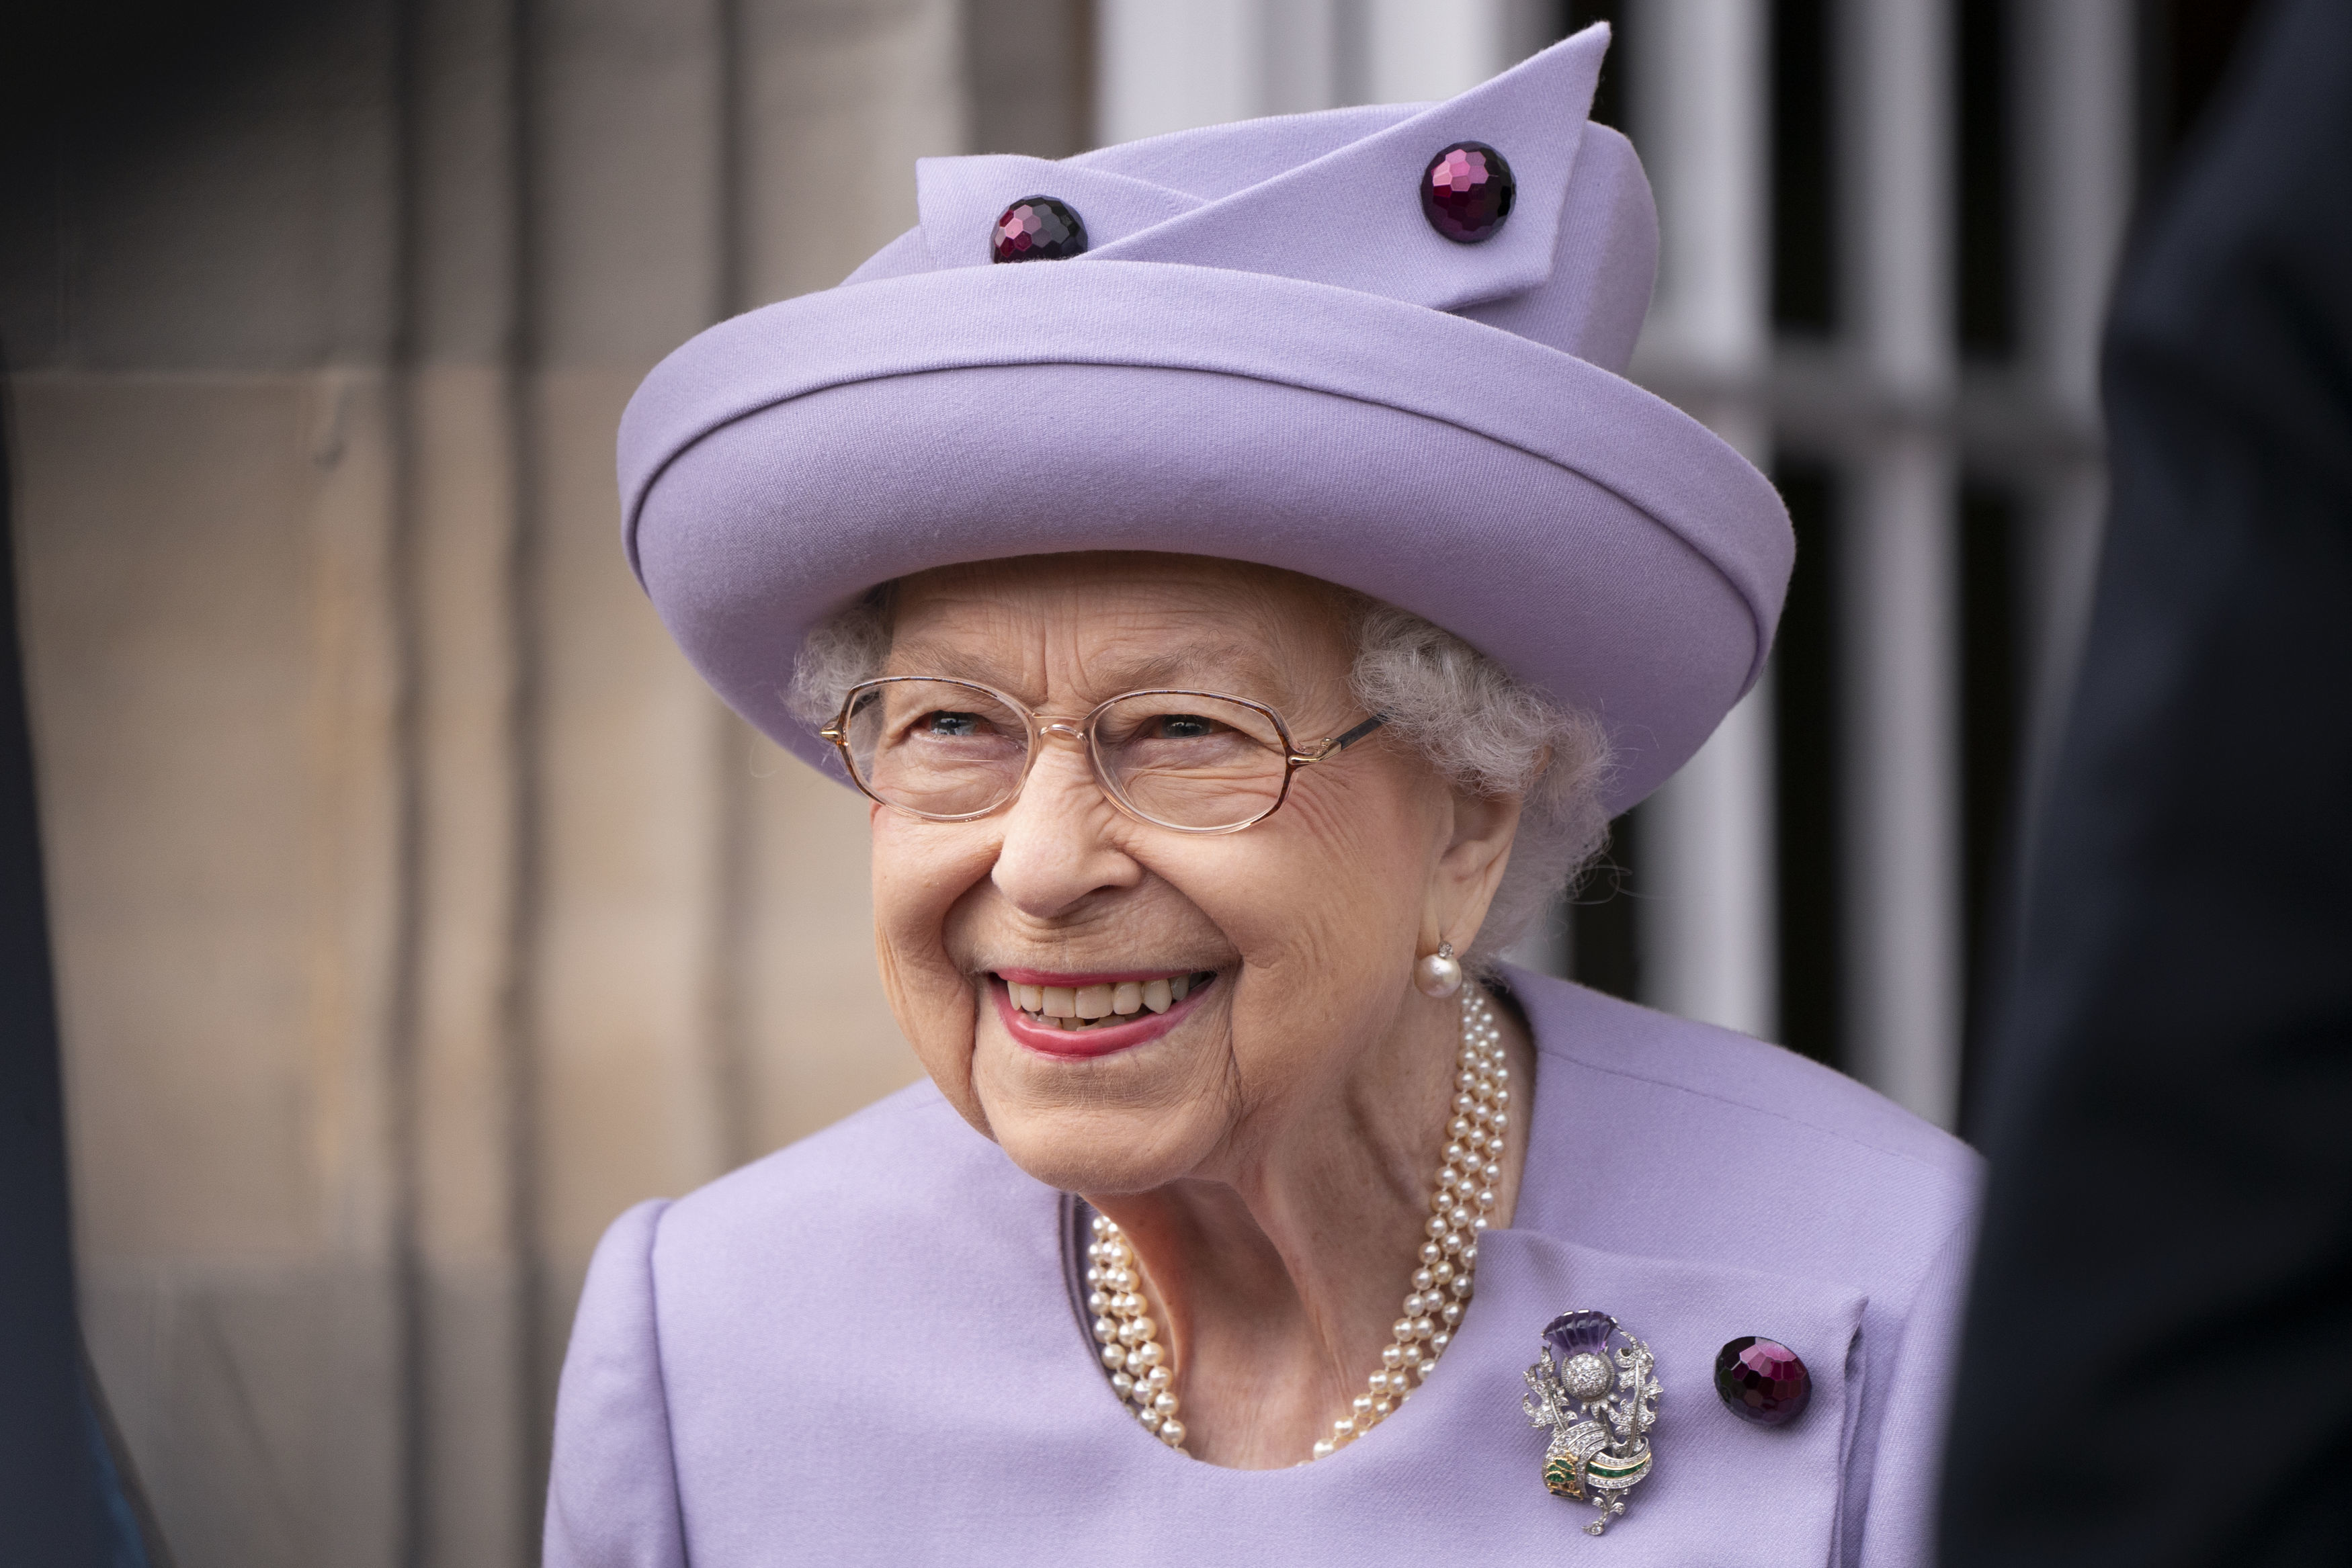 Queen Elizabeth Ii Interesting Facts About Her Life And Reign